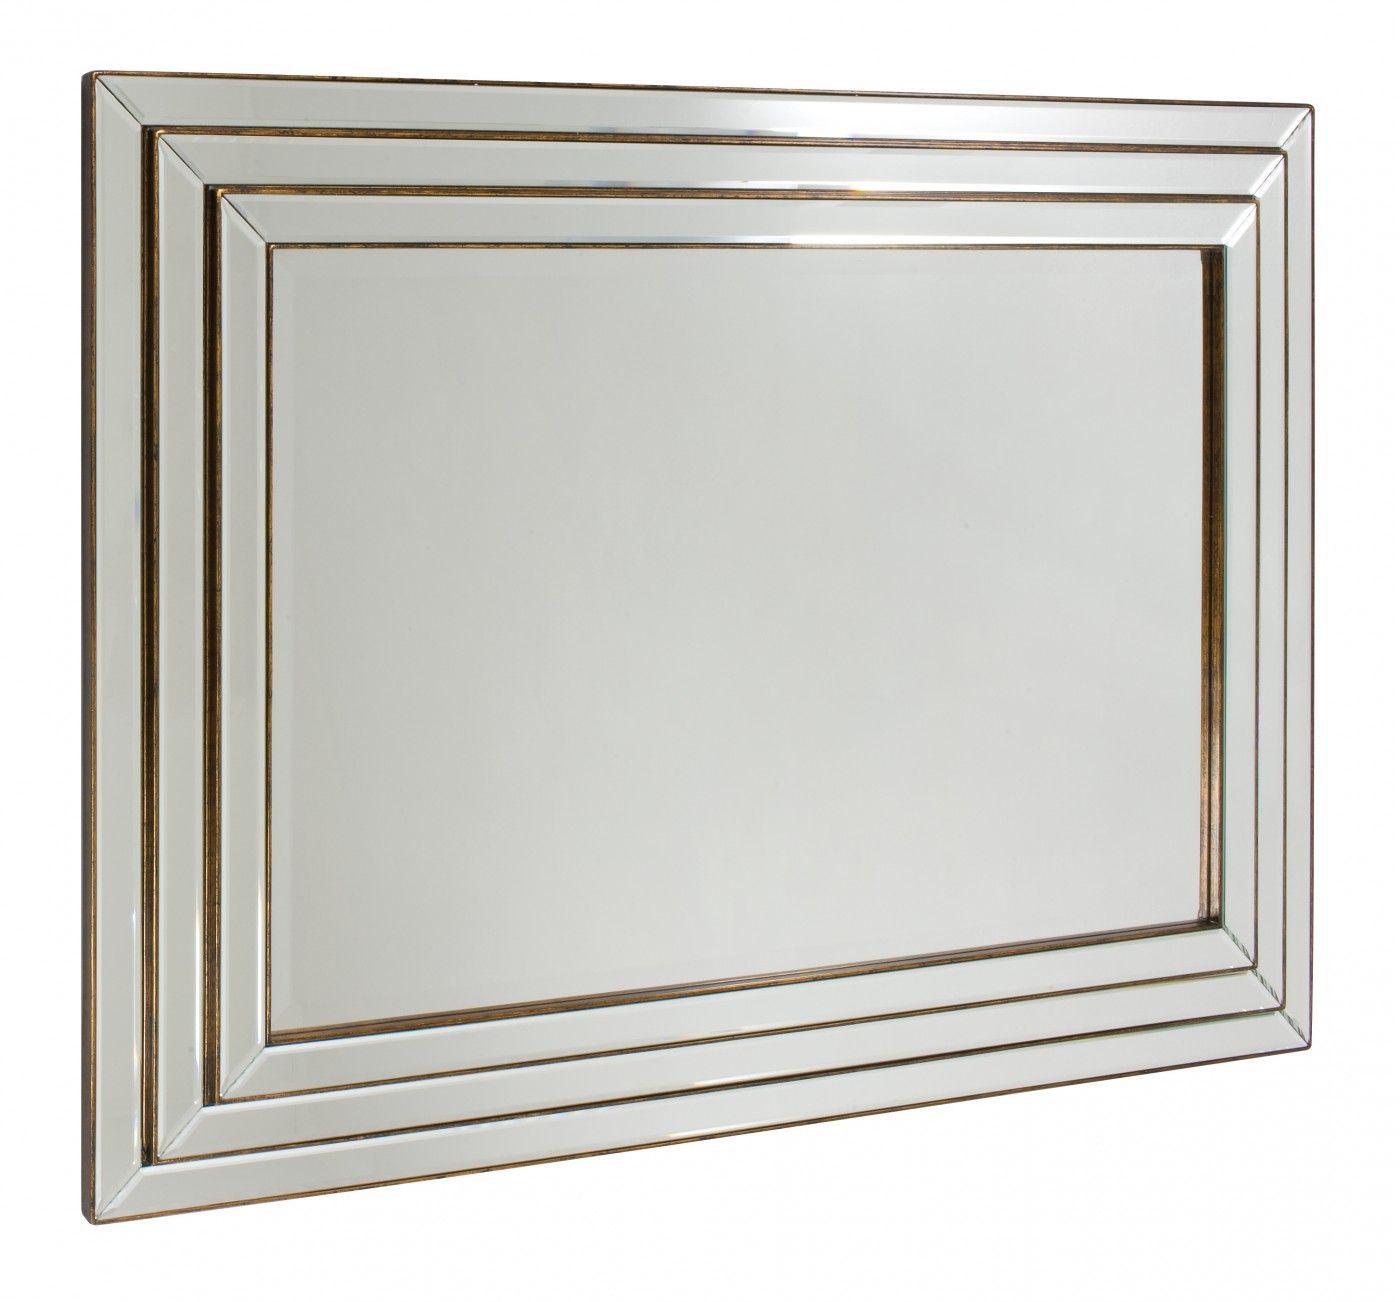 Chantel Wall Mirror Bronze In 2019 | Rustic Wall Mirrors, Mirror Intended For Silver And Bronze Wall Mirrors (Photo 4 of 15)